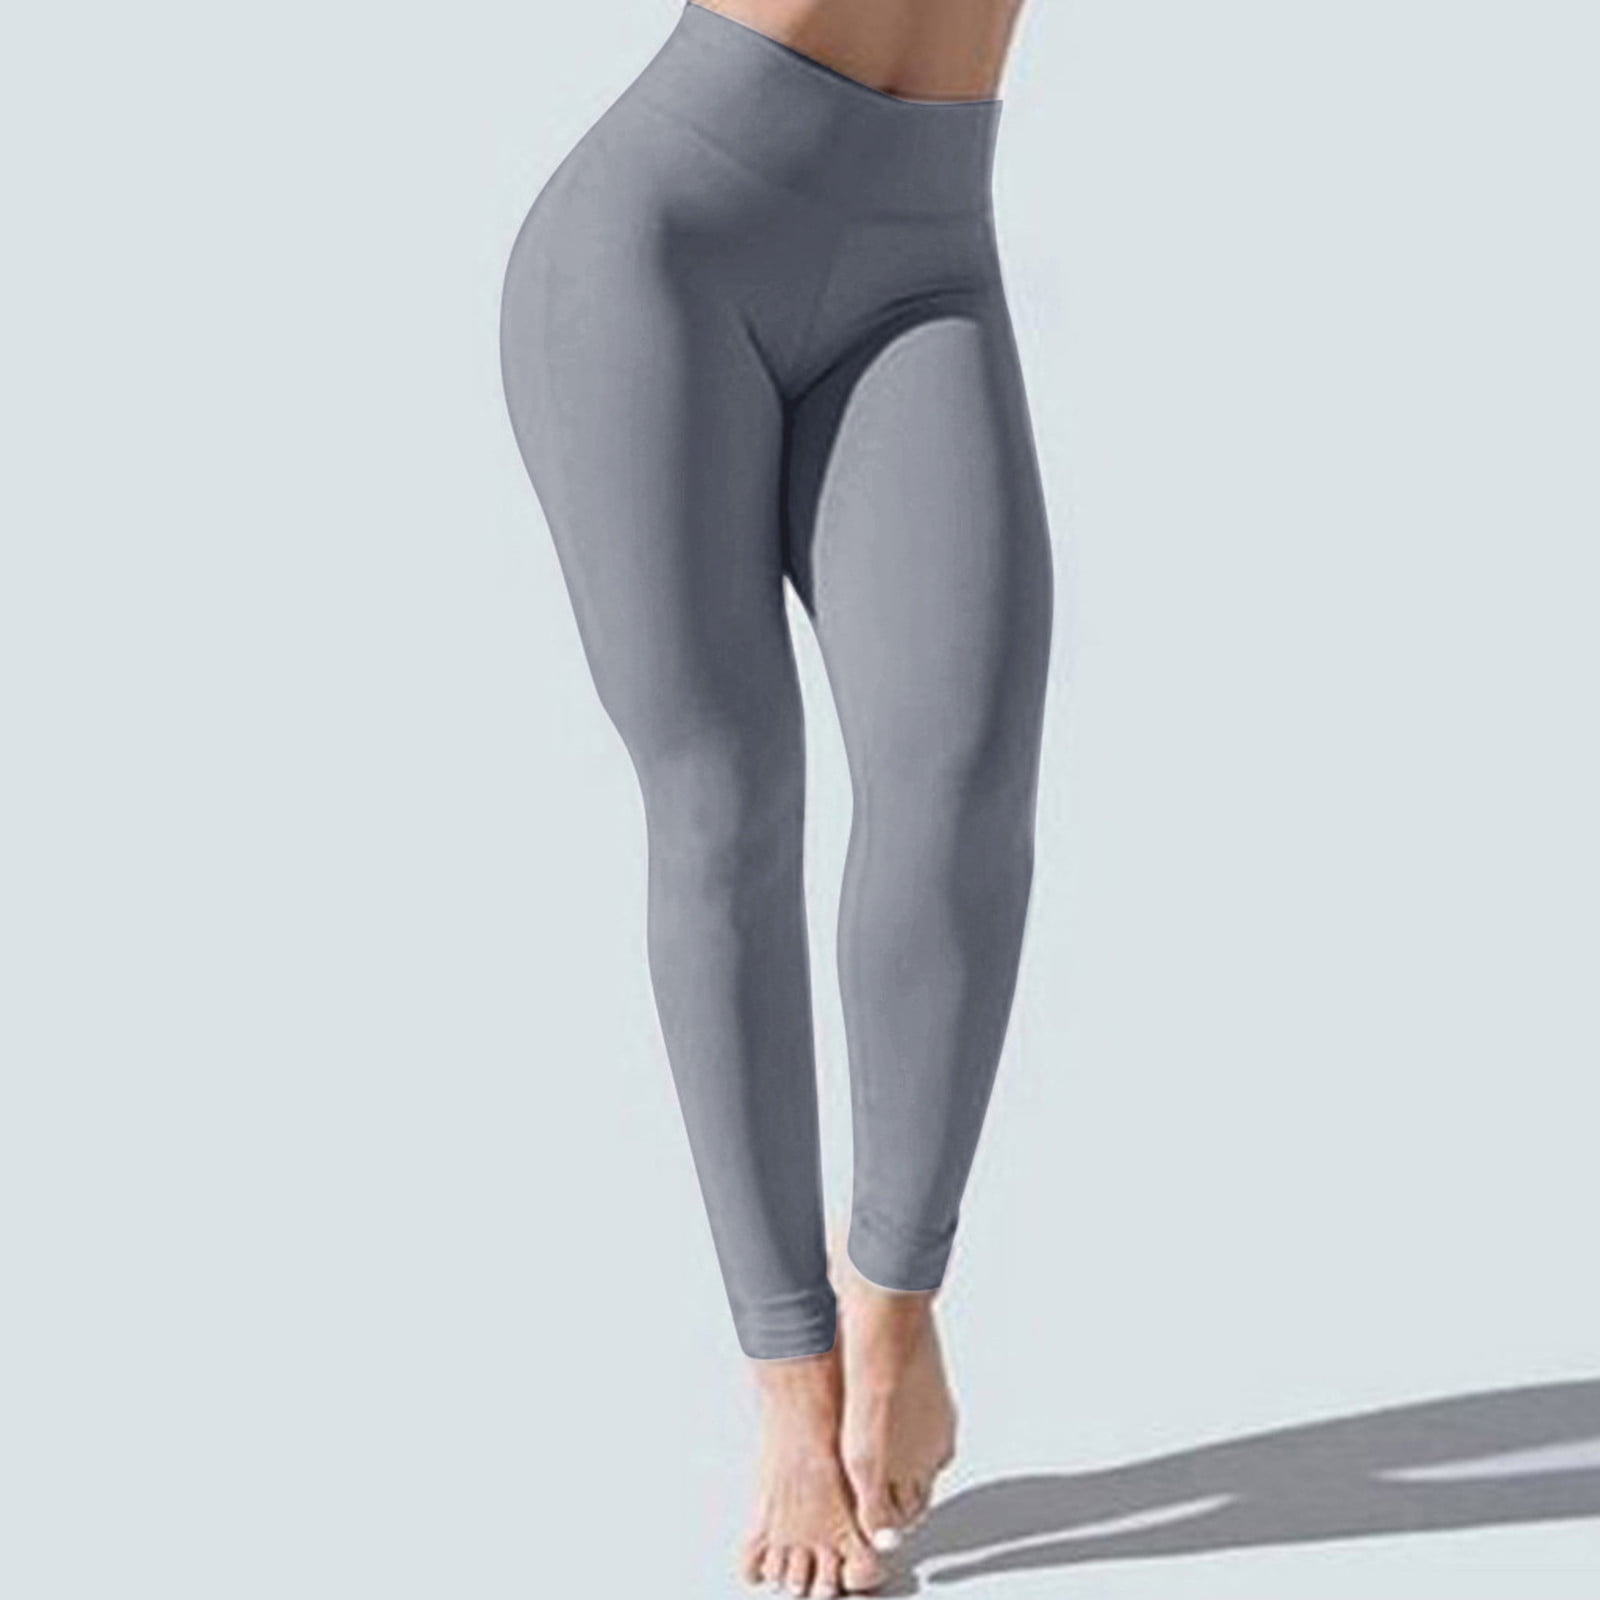 shascullfites melody high waist gray jeggings push up shaping jeans butt  lifting on eBid United States